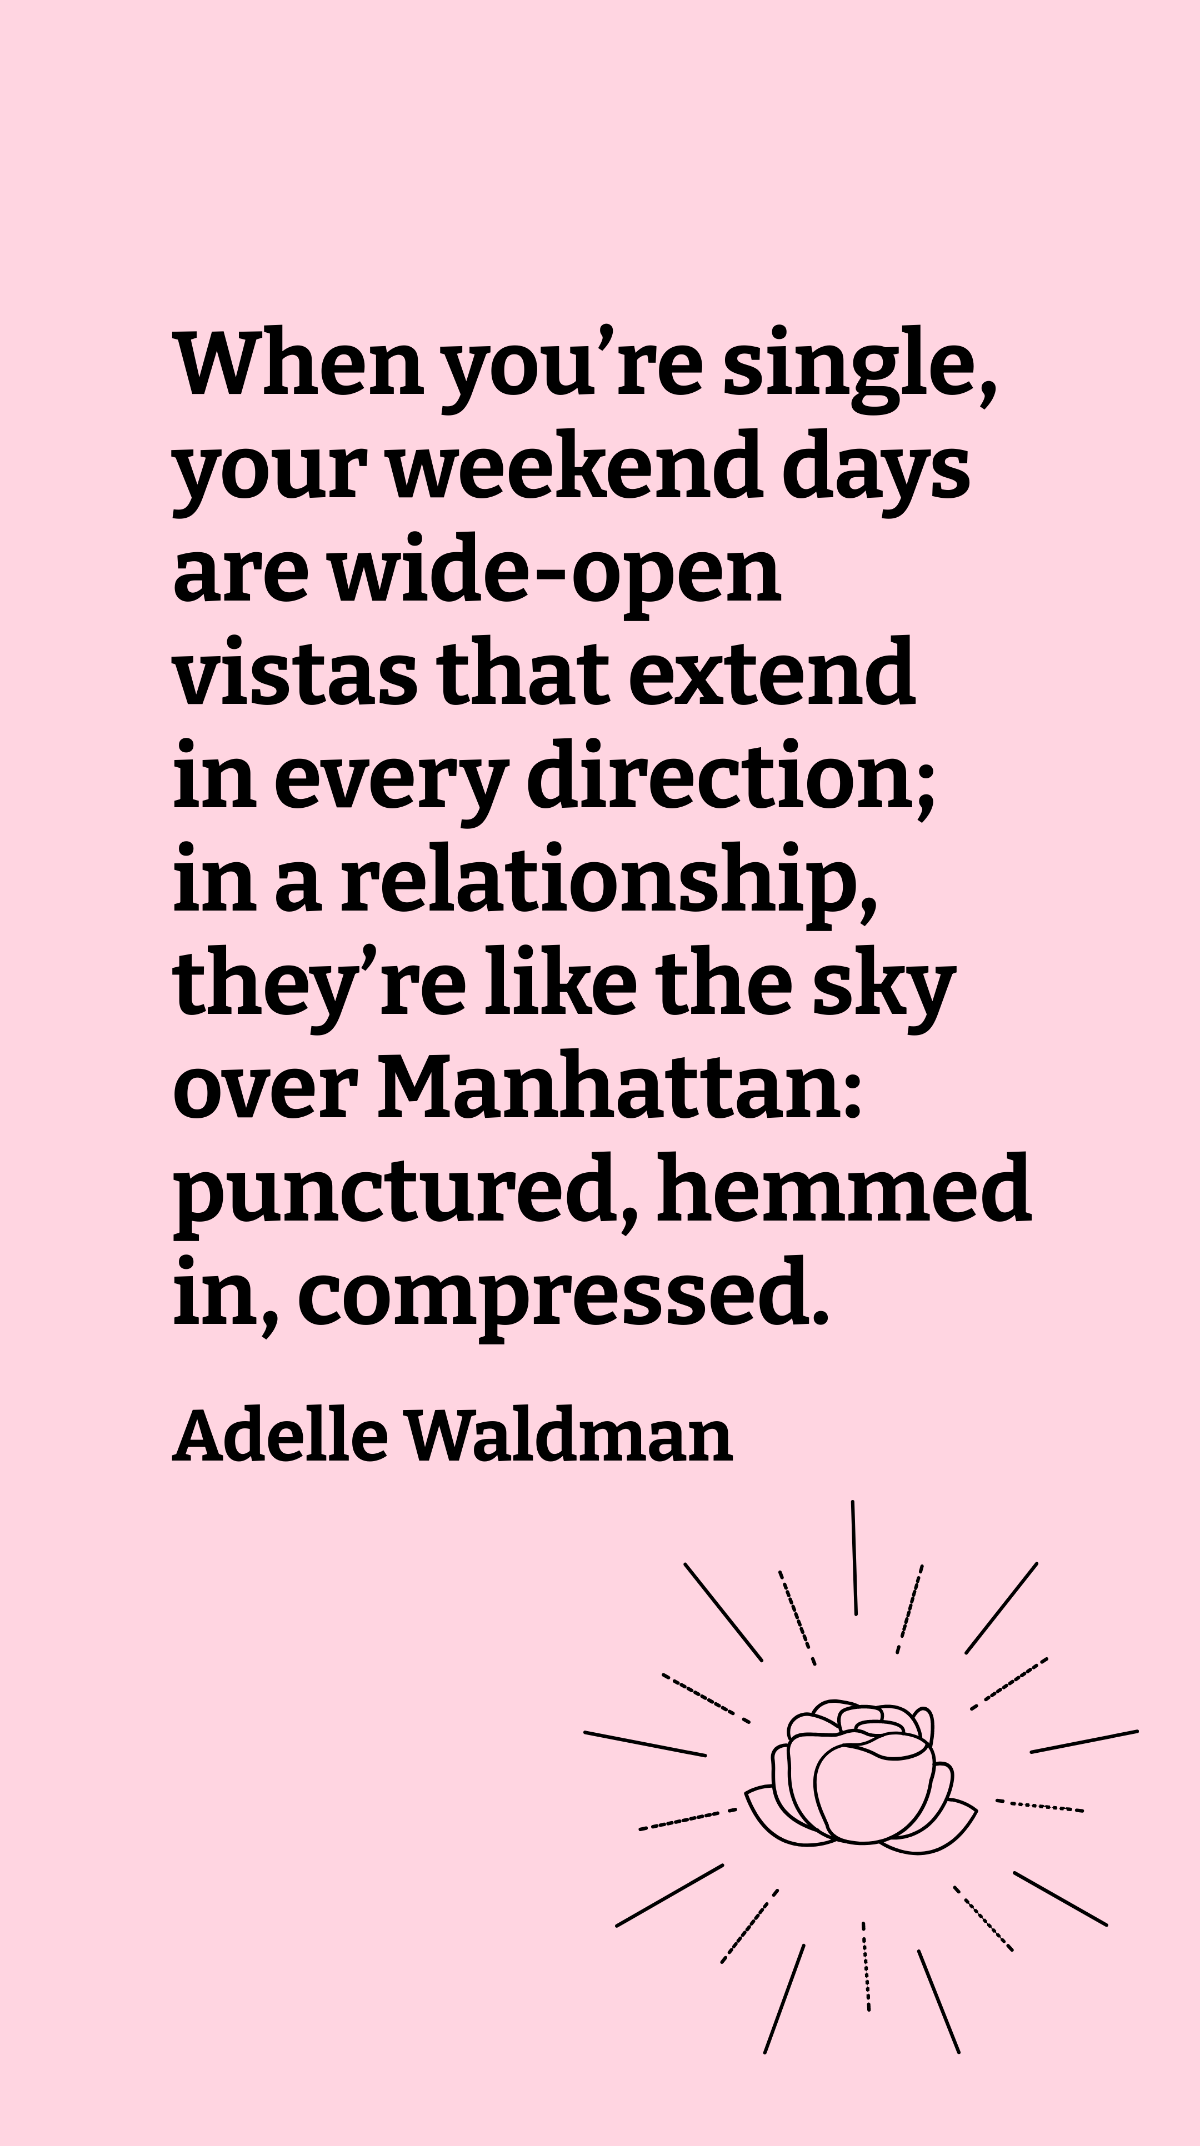 Adelle Waldman - When you’re single, your weekend days are wide-open vistas that extend in every direction; in a relationship, they’re like the sky over Manhattan: punctured, hemmed in, compressed.  T